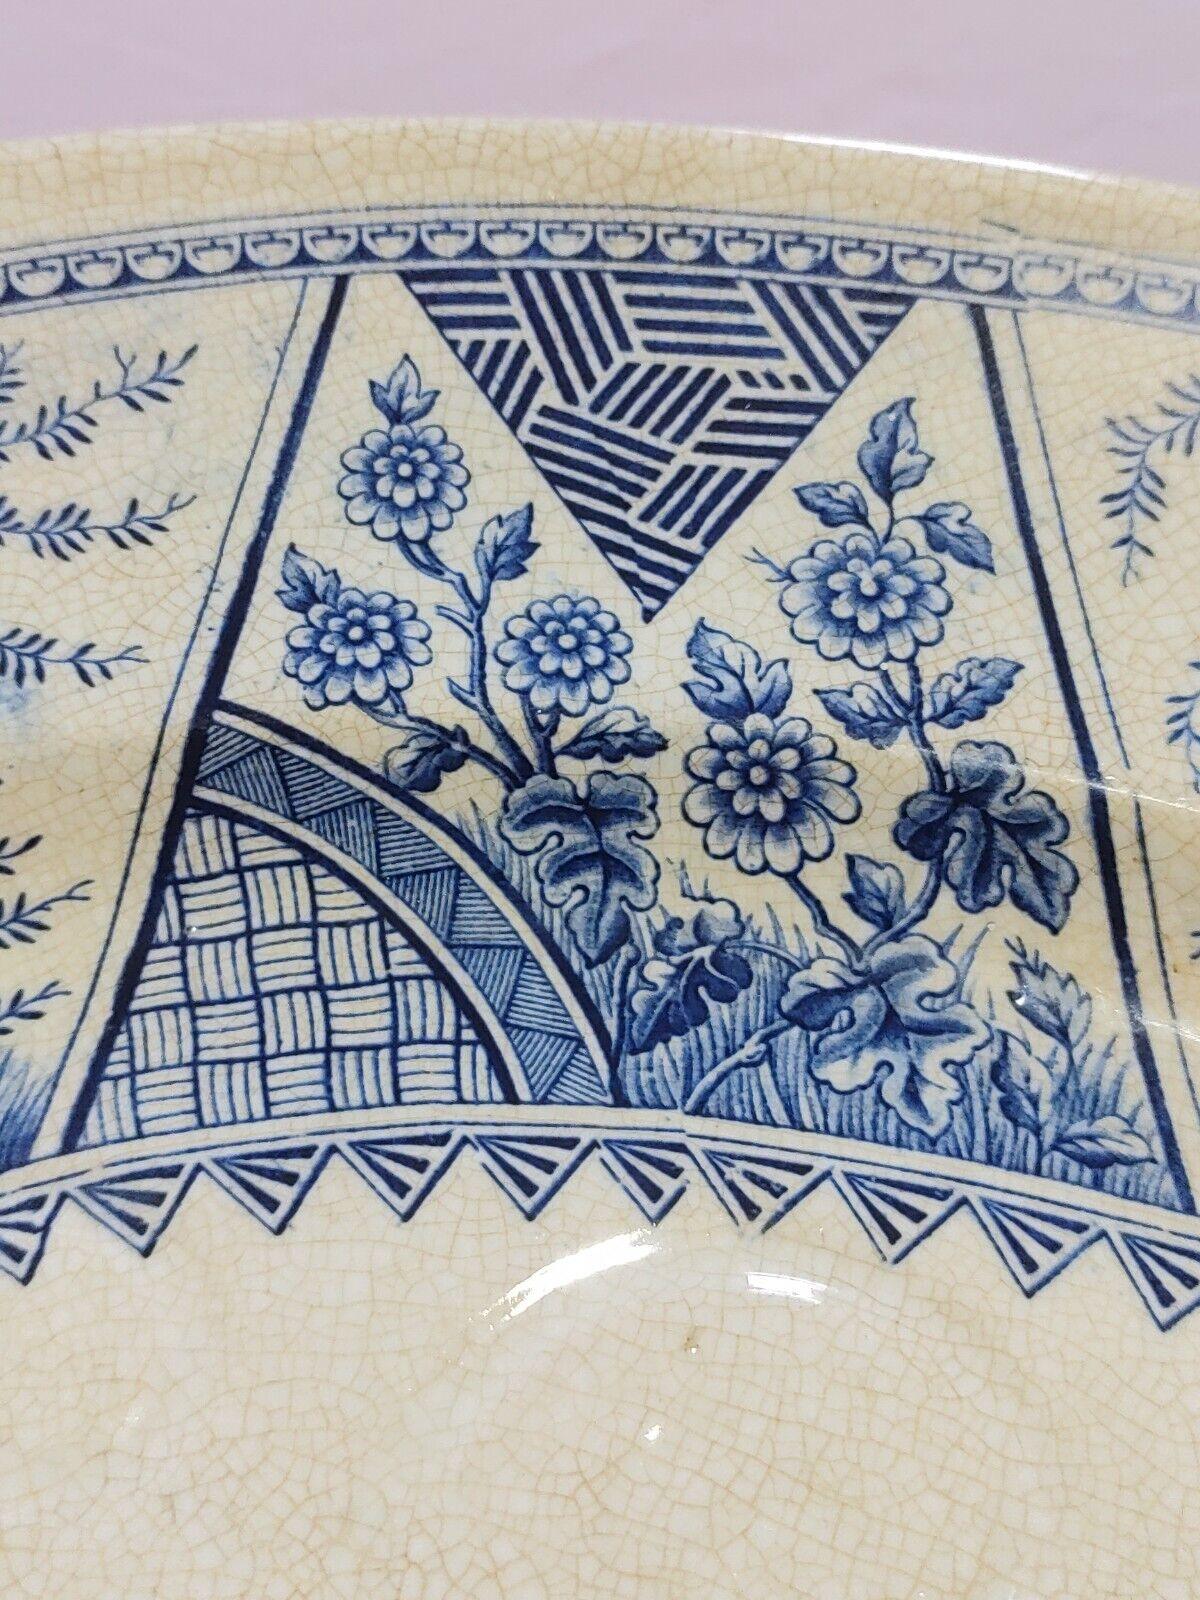 Antique 19th C. Old Hall Pottery Aestheticism Blue White Ceramic Meat Plate 54cm - Tommy's Treasure